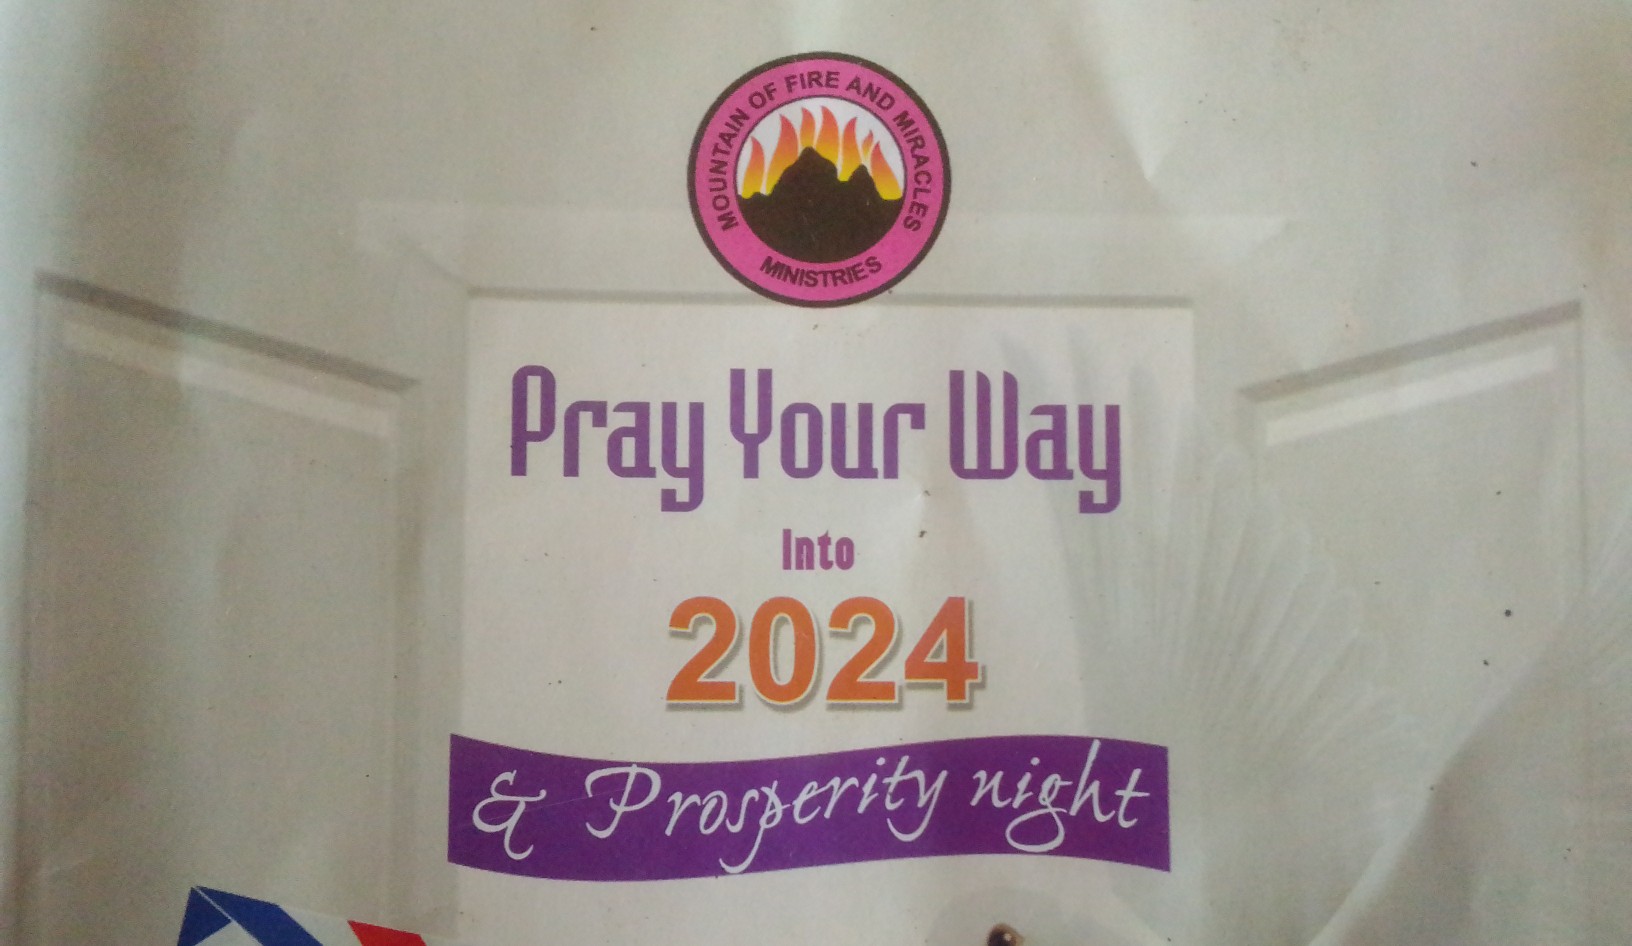 MFM Pray Your Way into 2024 and Prosperity Night 30 December 2023 - The Wicked Must Be Disgraced